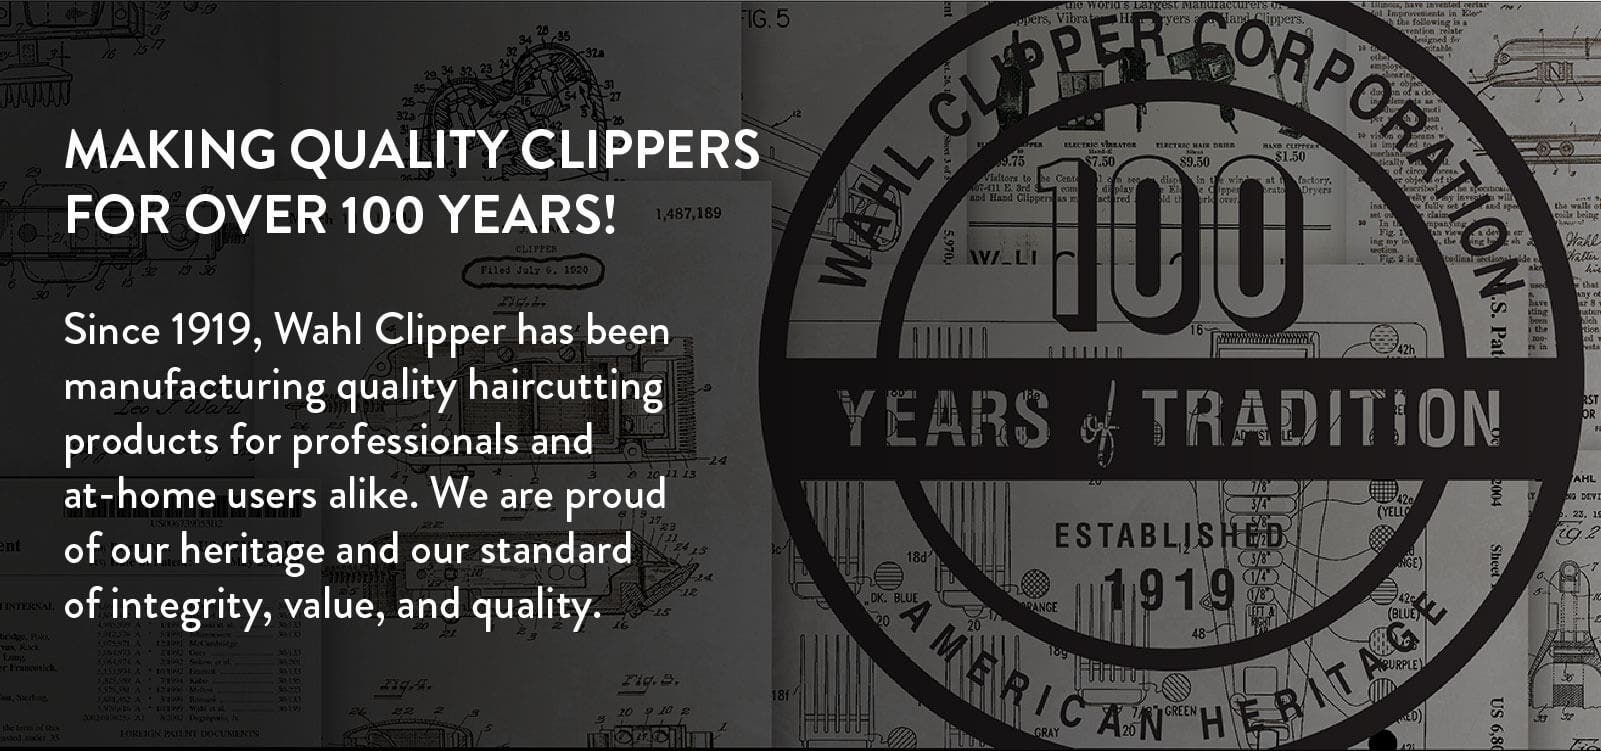 Wahl Professional Has Proudly Made Quality Hair Clippers for Over 100 Years